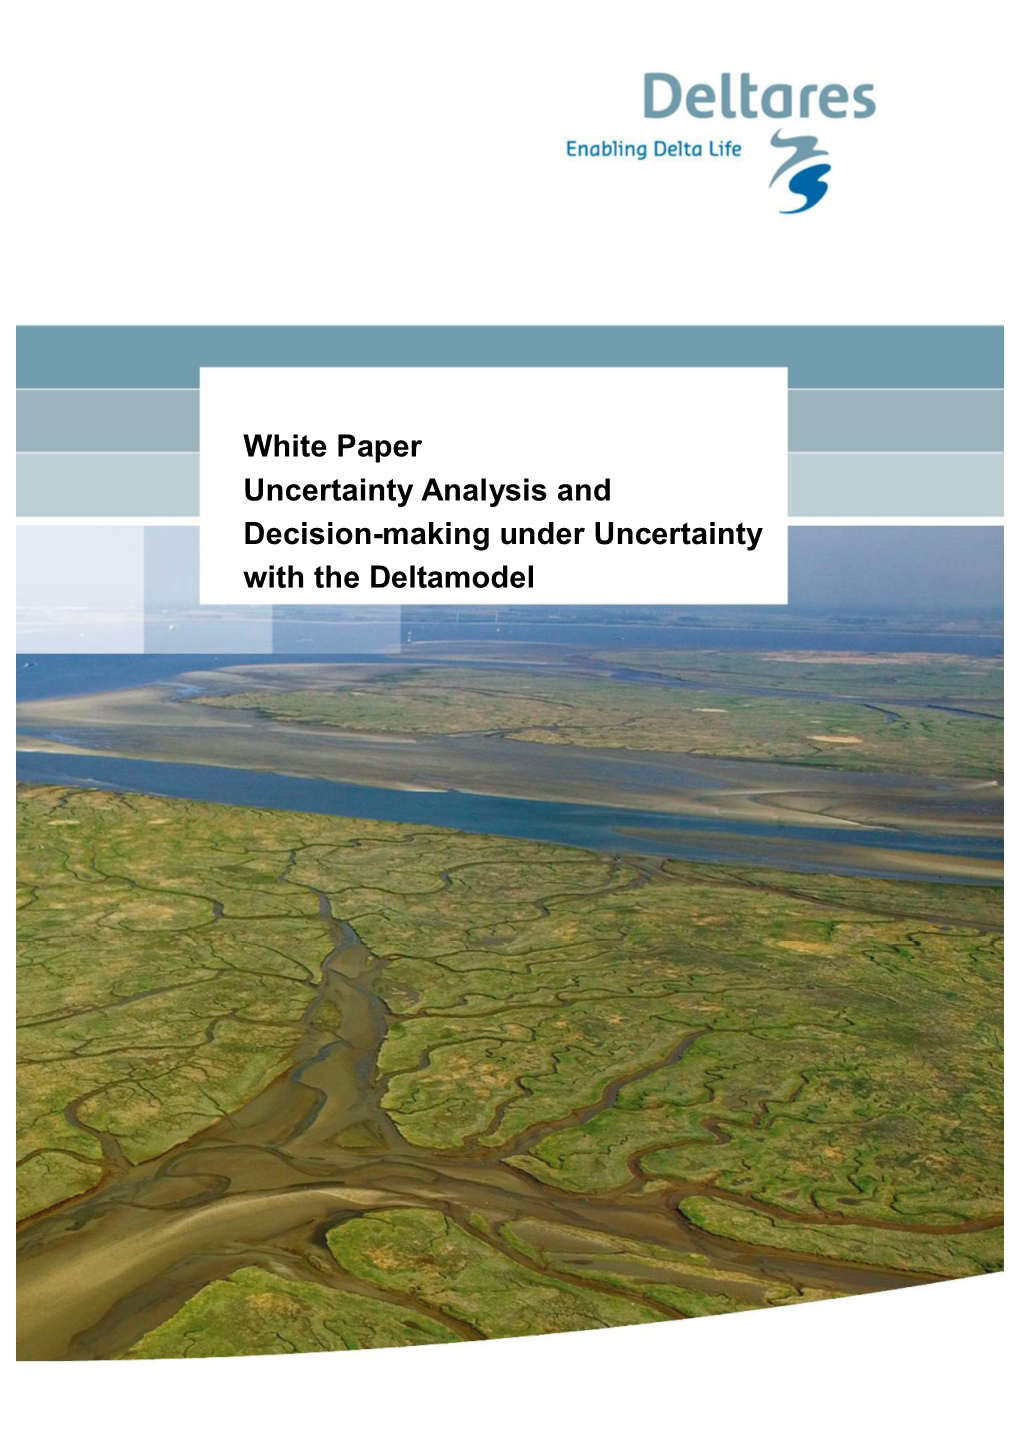 White Paper Uncertainty Analysis and Decision-Making Under Uncertainty with the Deltamodel